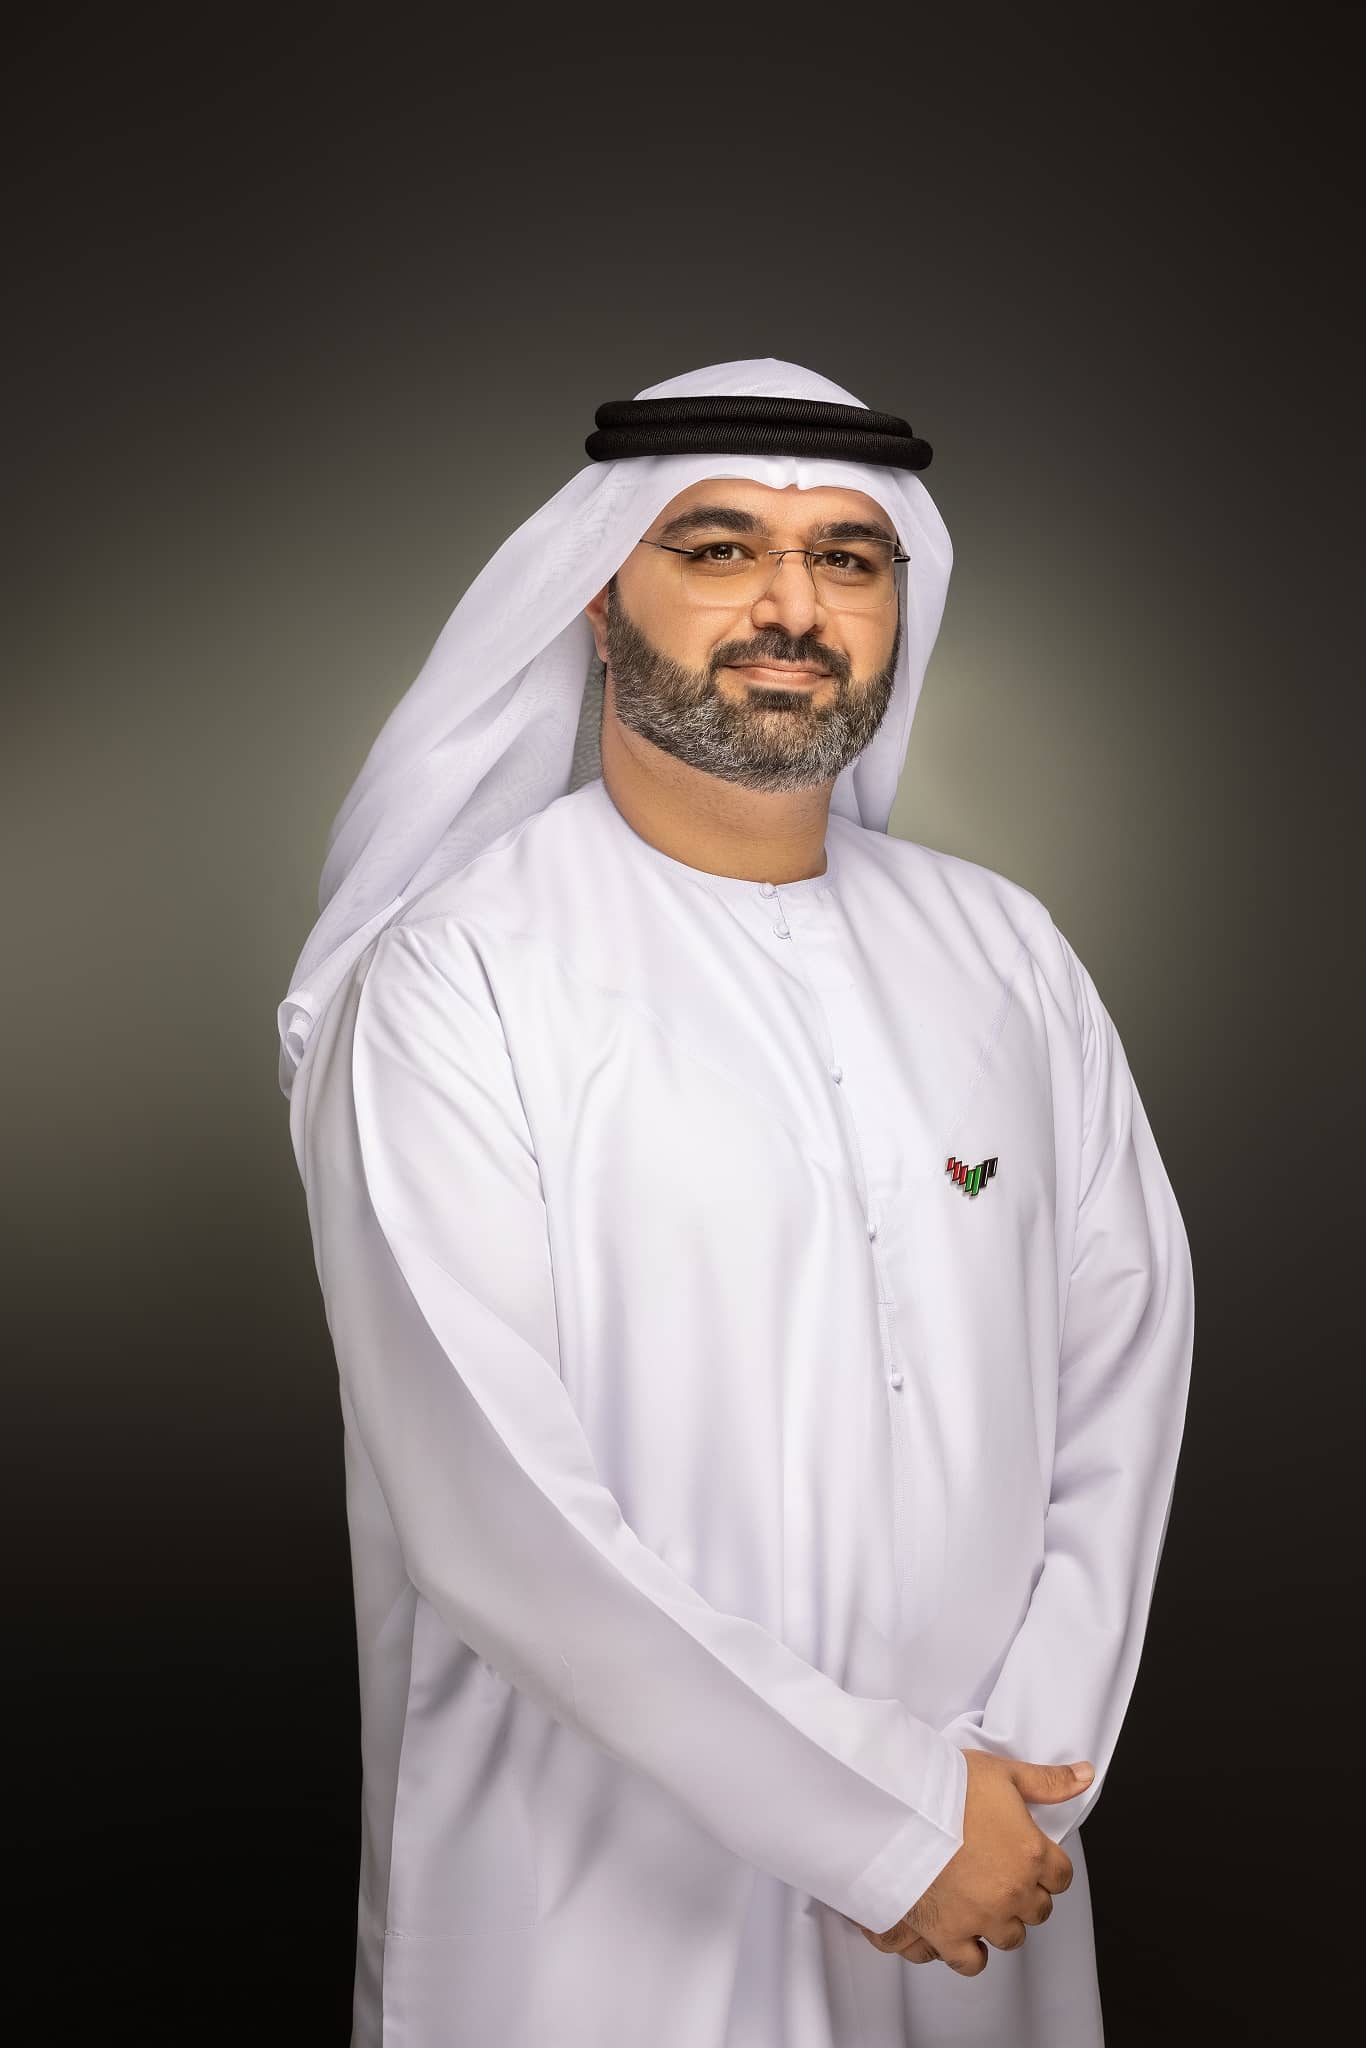 Dr. Fahed Al Marzooqi, Deputy Chief Operating Officer of M42